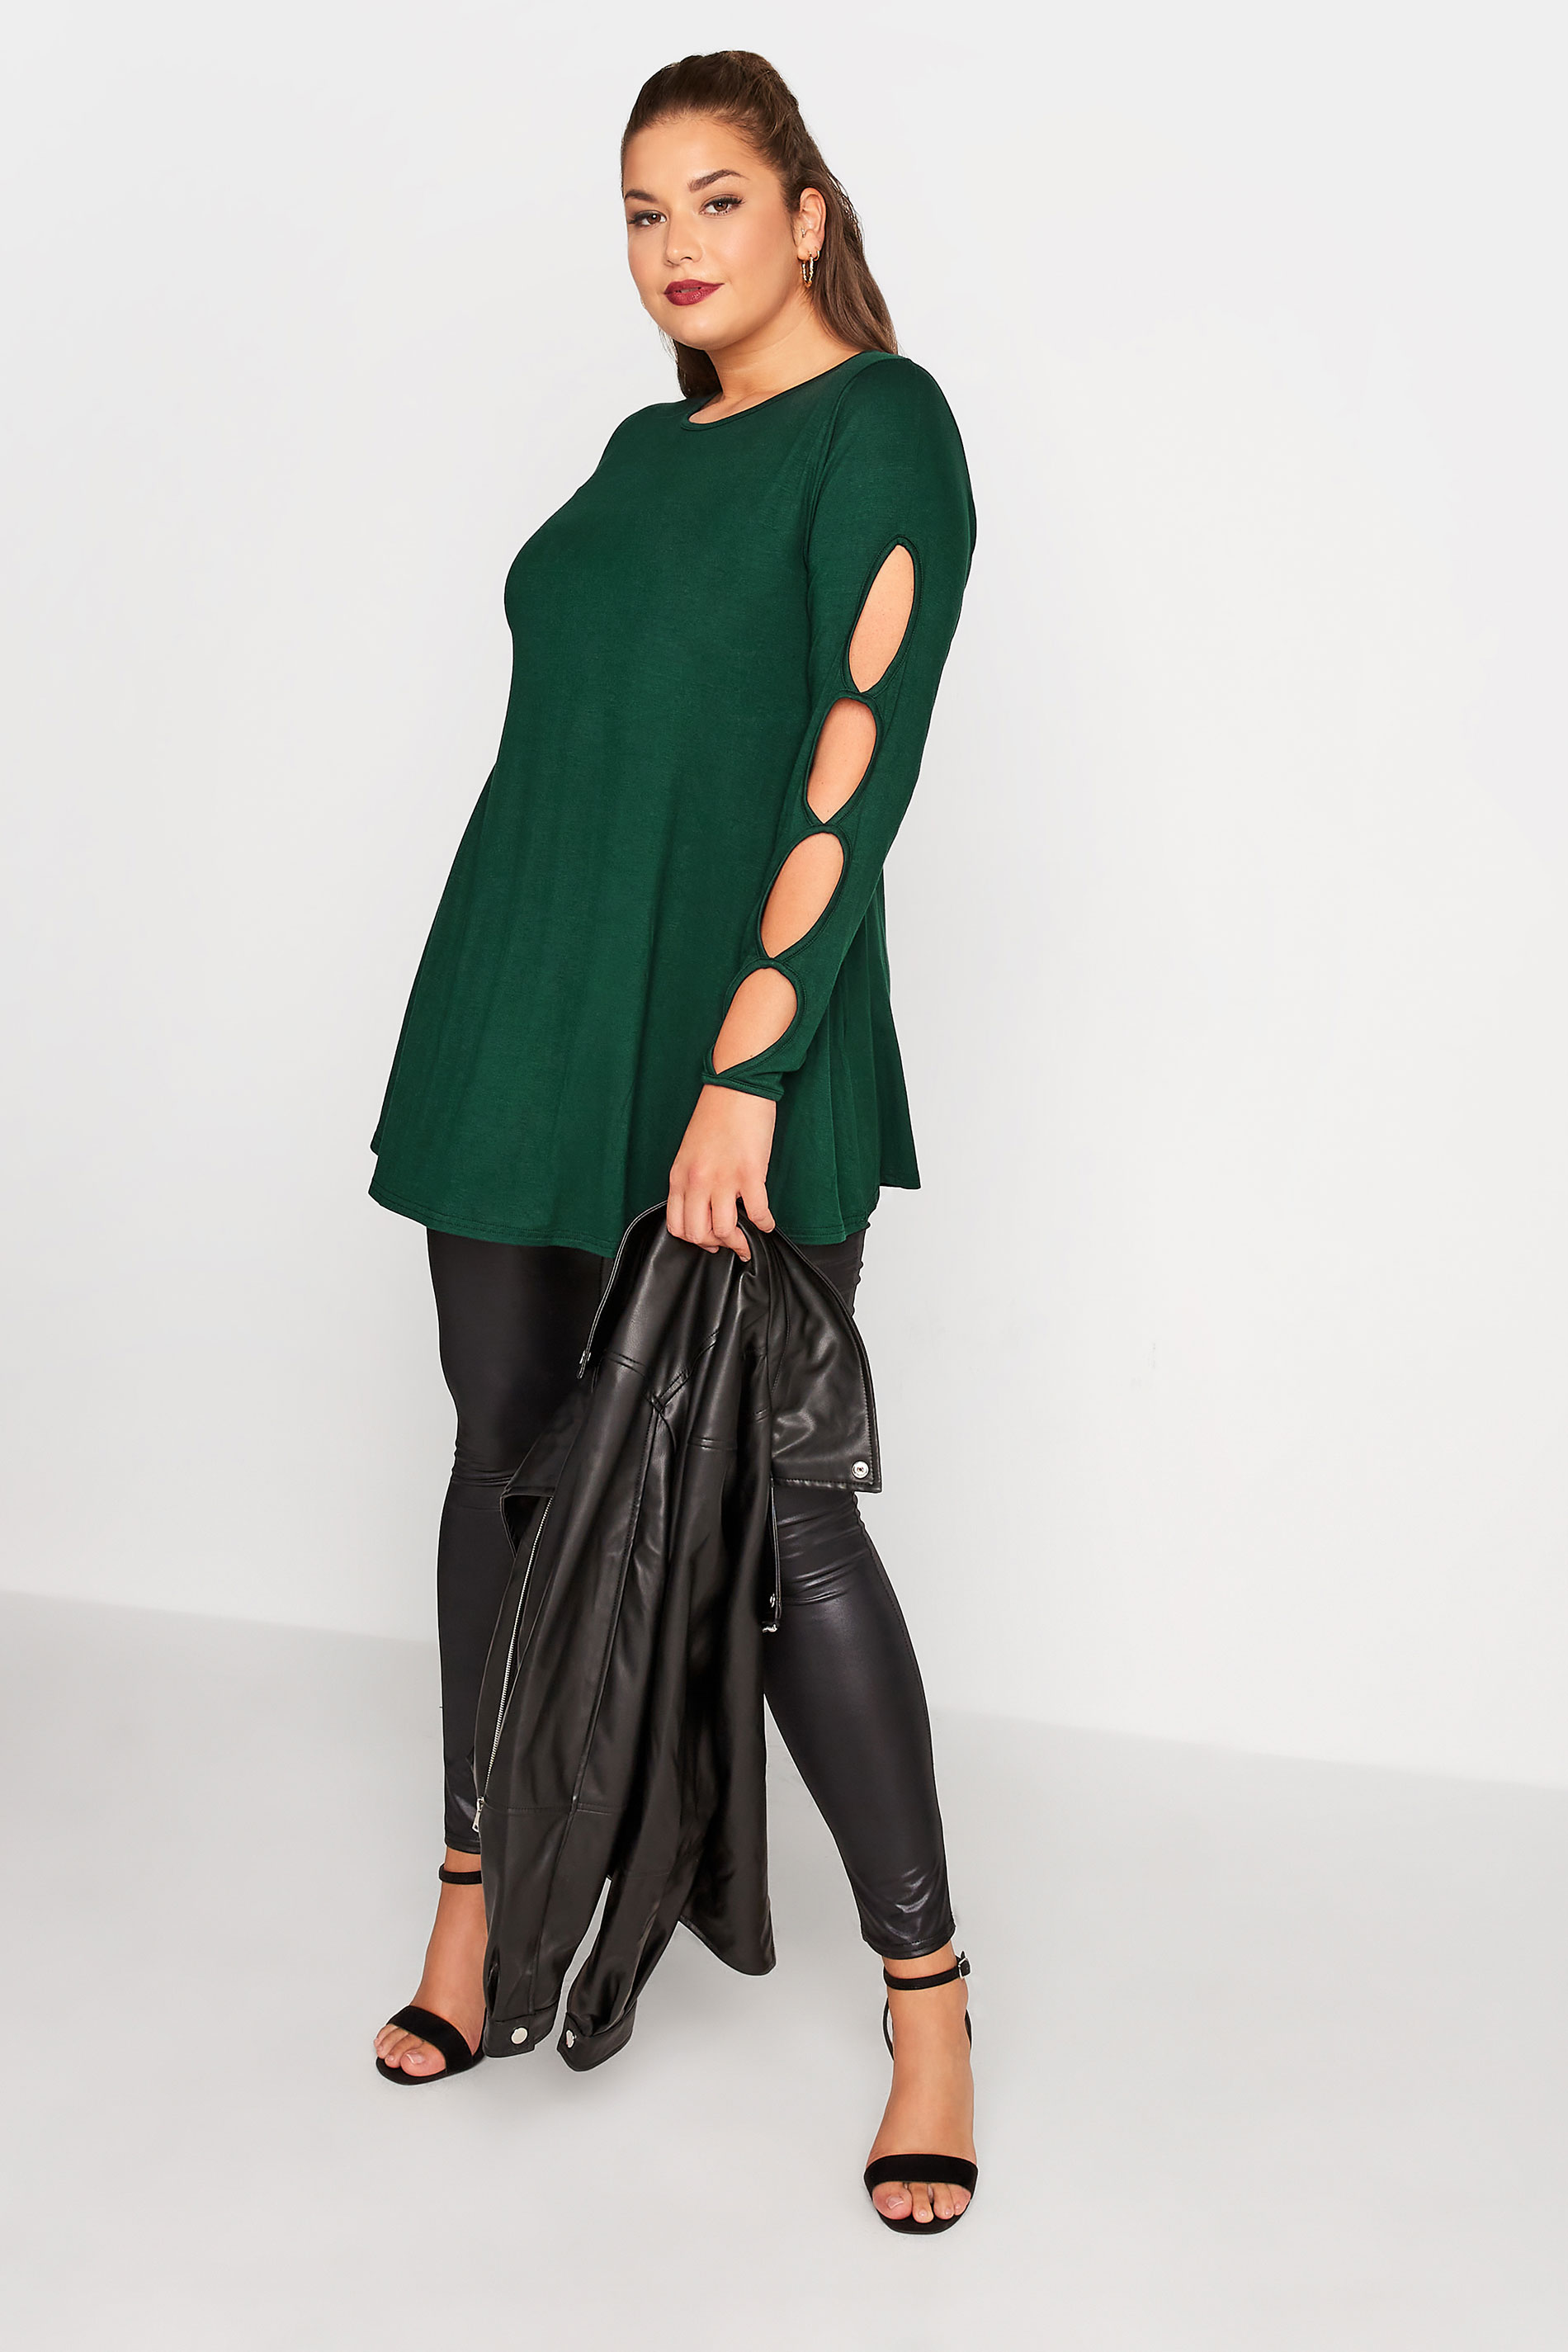 LIMITED COLLECTION Plus Size Forest Green Cut Out Sleeve Top | Yours Clothing 2